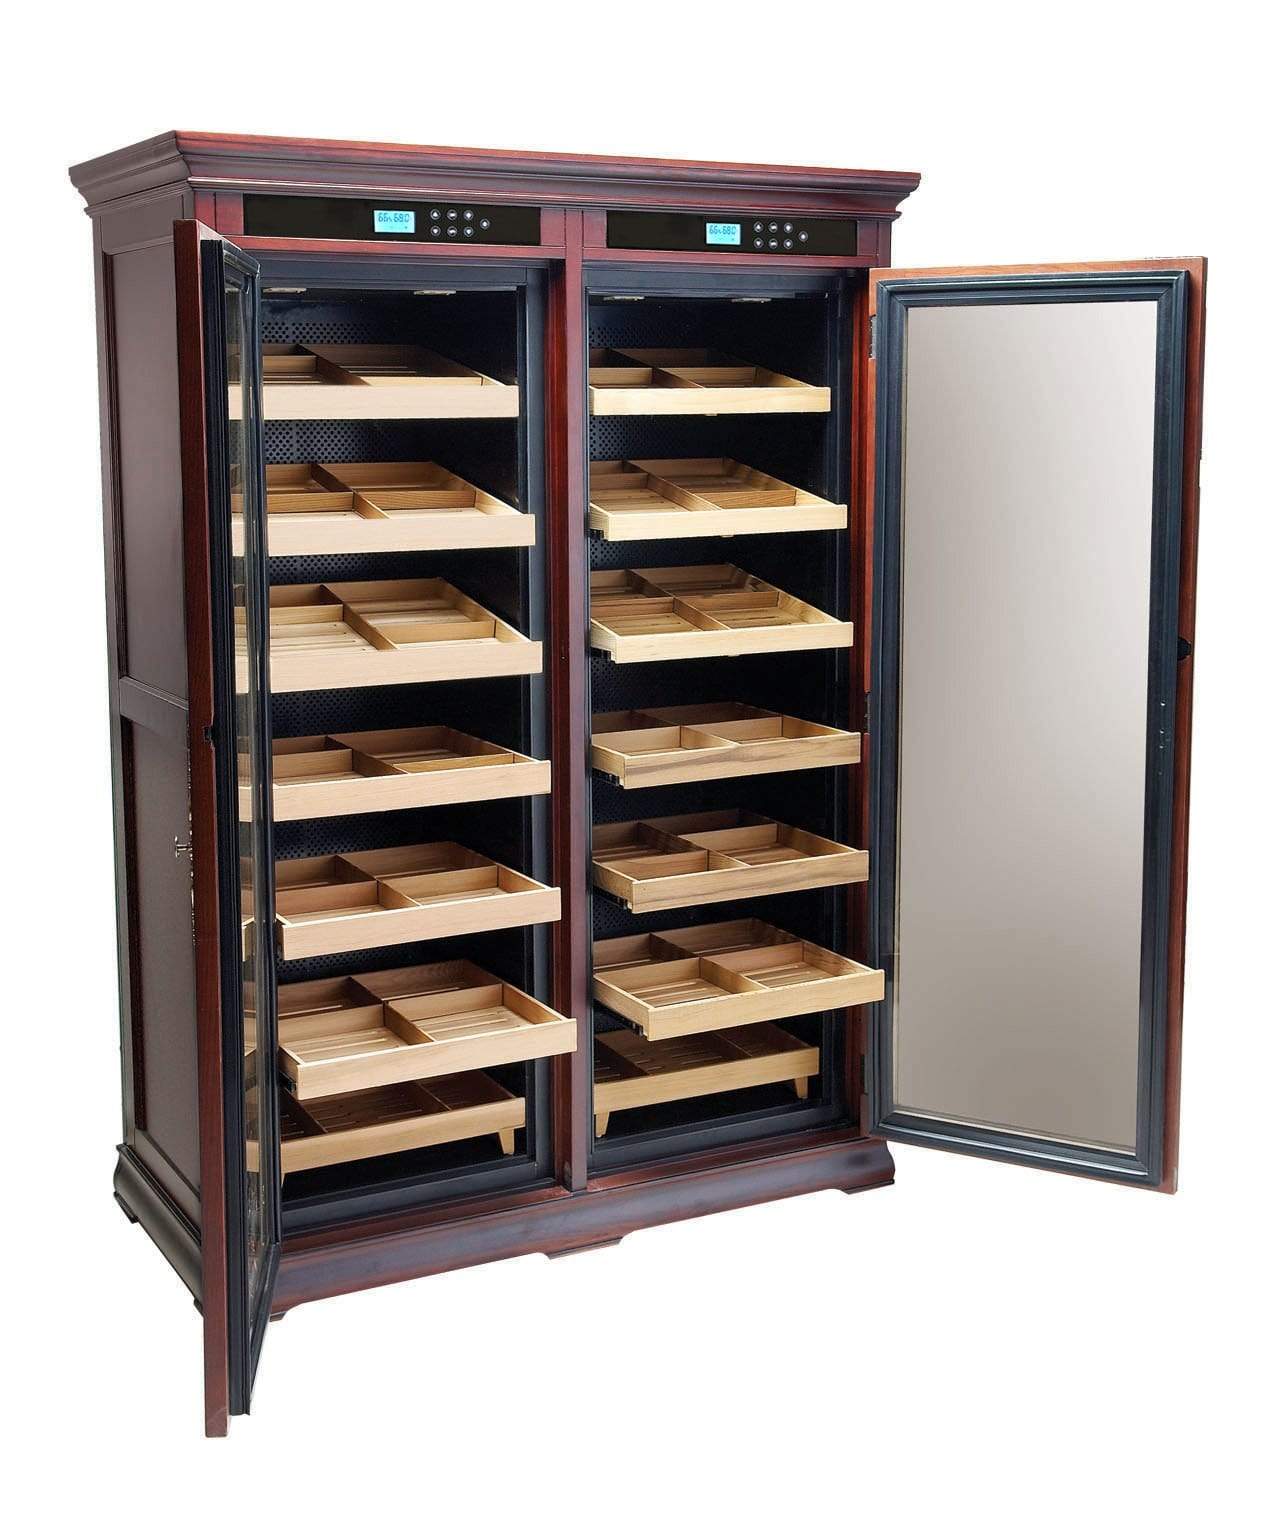 https://cdn.shopify.com/s/files/1/1189/9418/products/the-reagan-dual-zone-climate-controlled-humidor-cabinet-4-000-cigars-prestige-humidor-30427034452167_1600x.jpg?v=1628018041